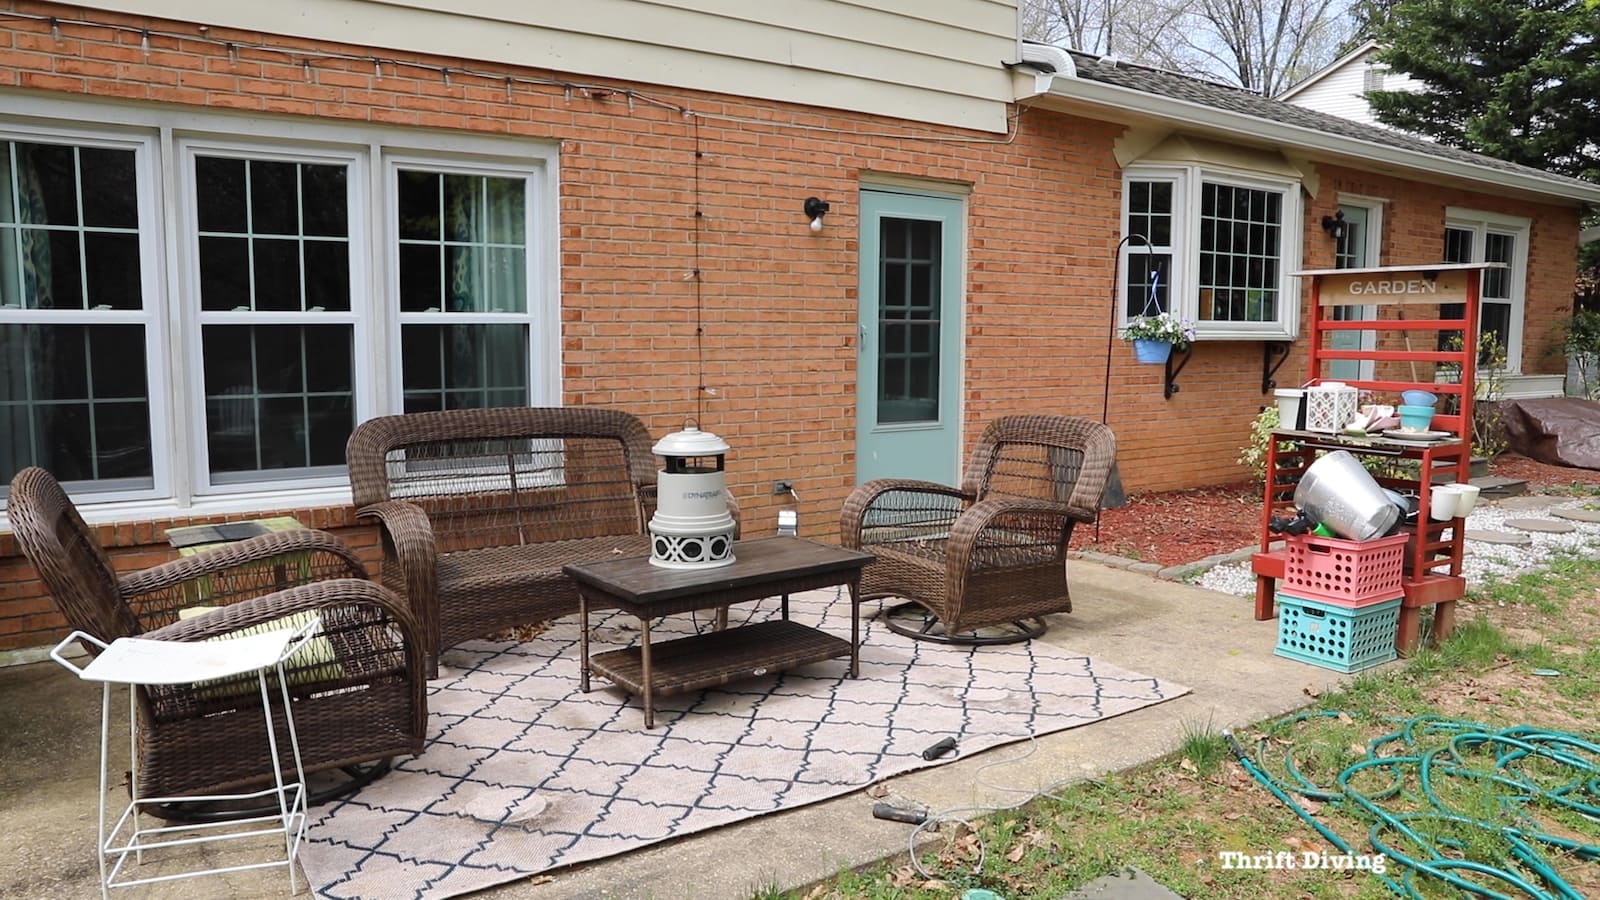 Outdoor Makeover - Creating a DIY Outdoor Makeover - Patio area was dirty. - Thrift Diving